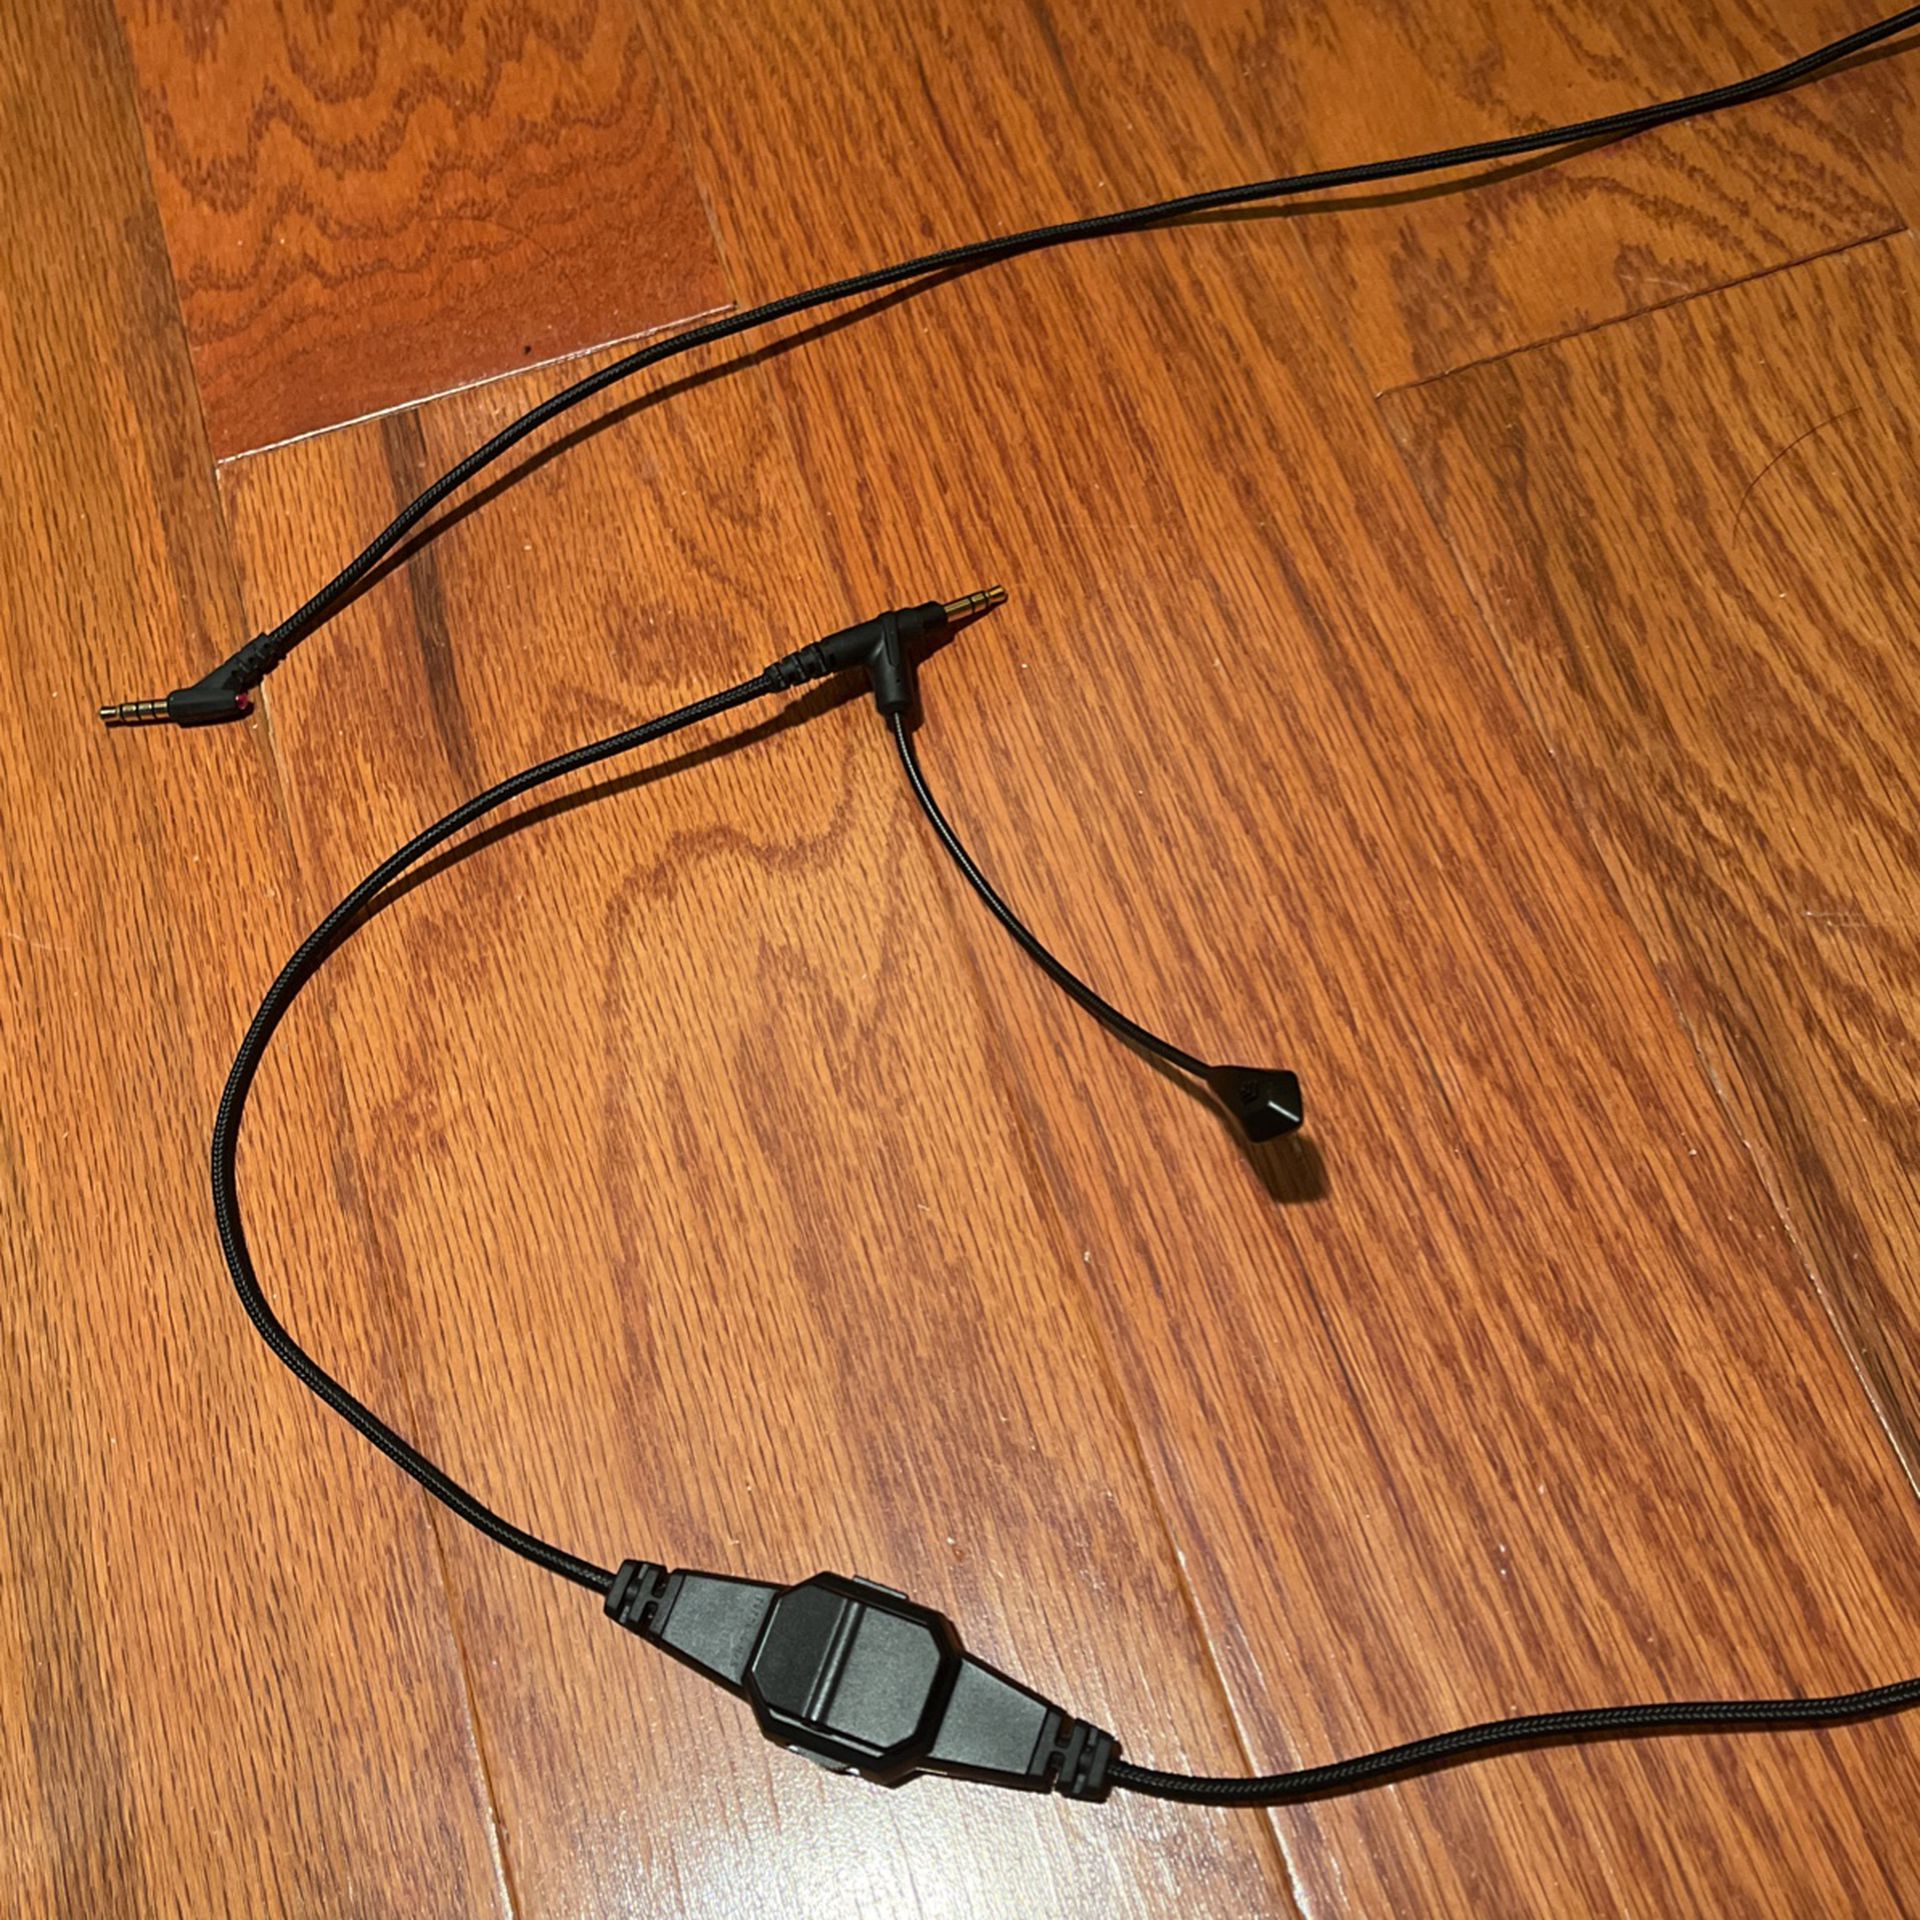 Mic Attachment For Headphones